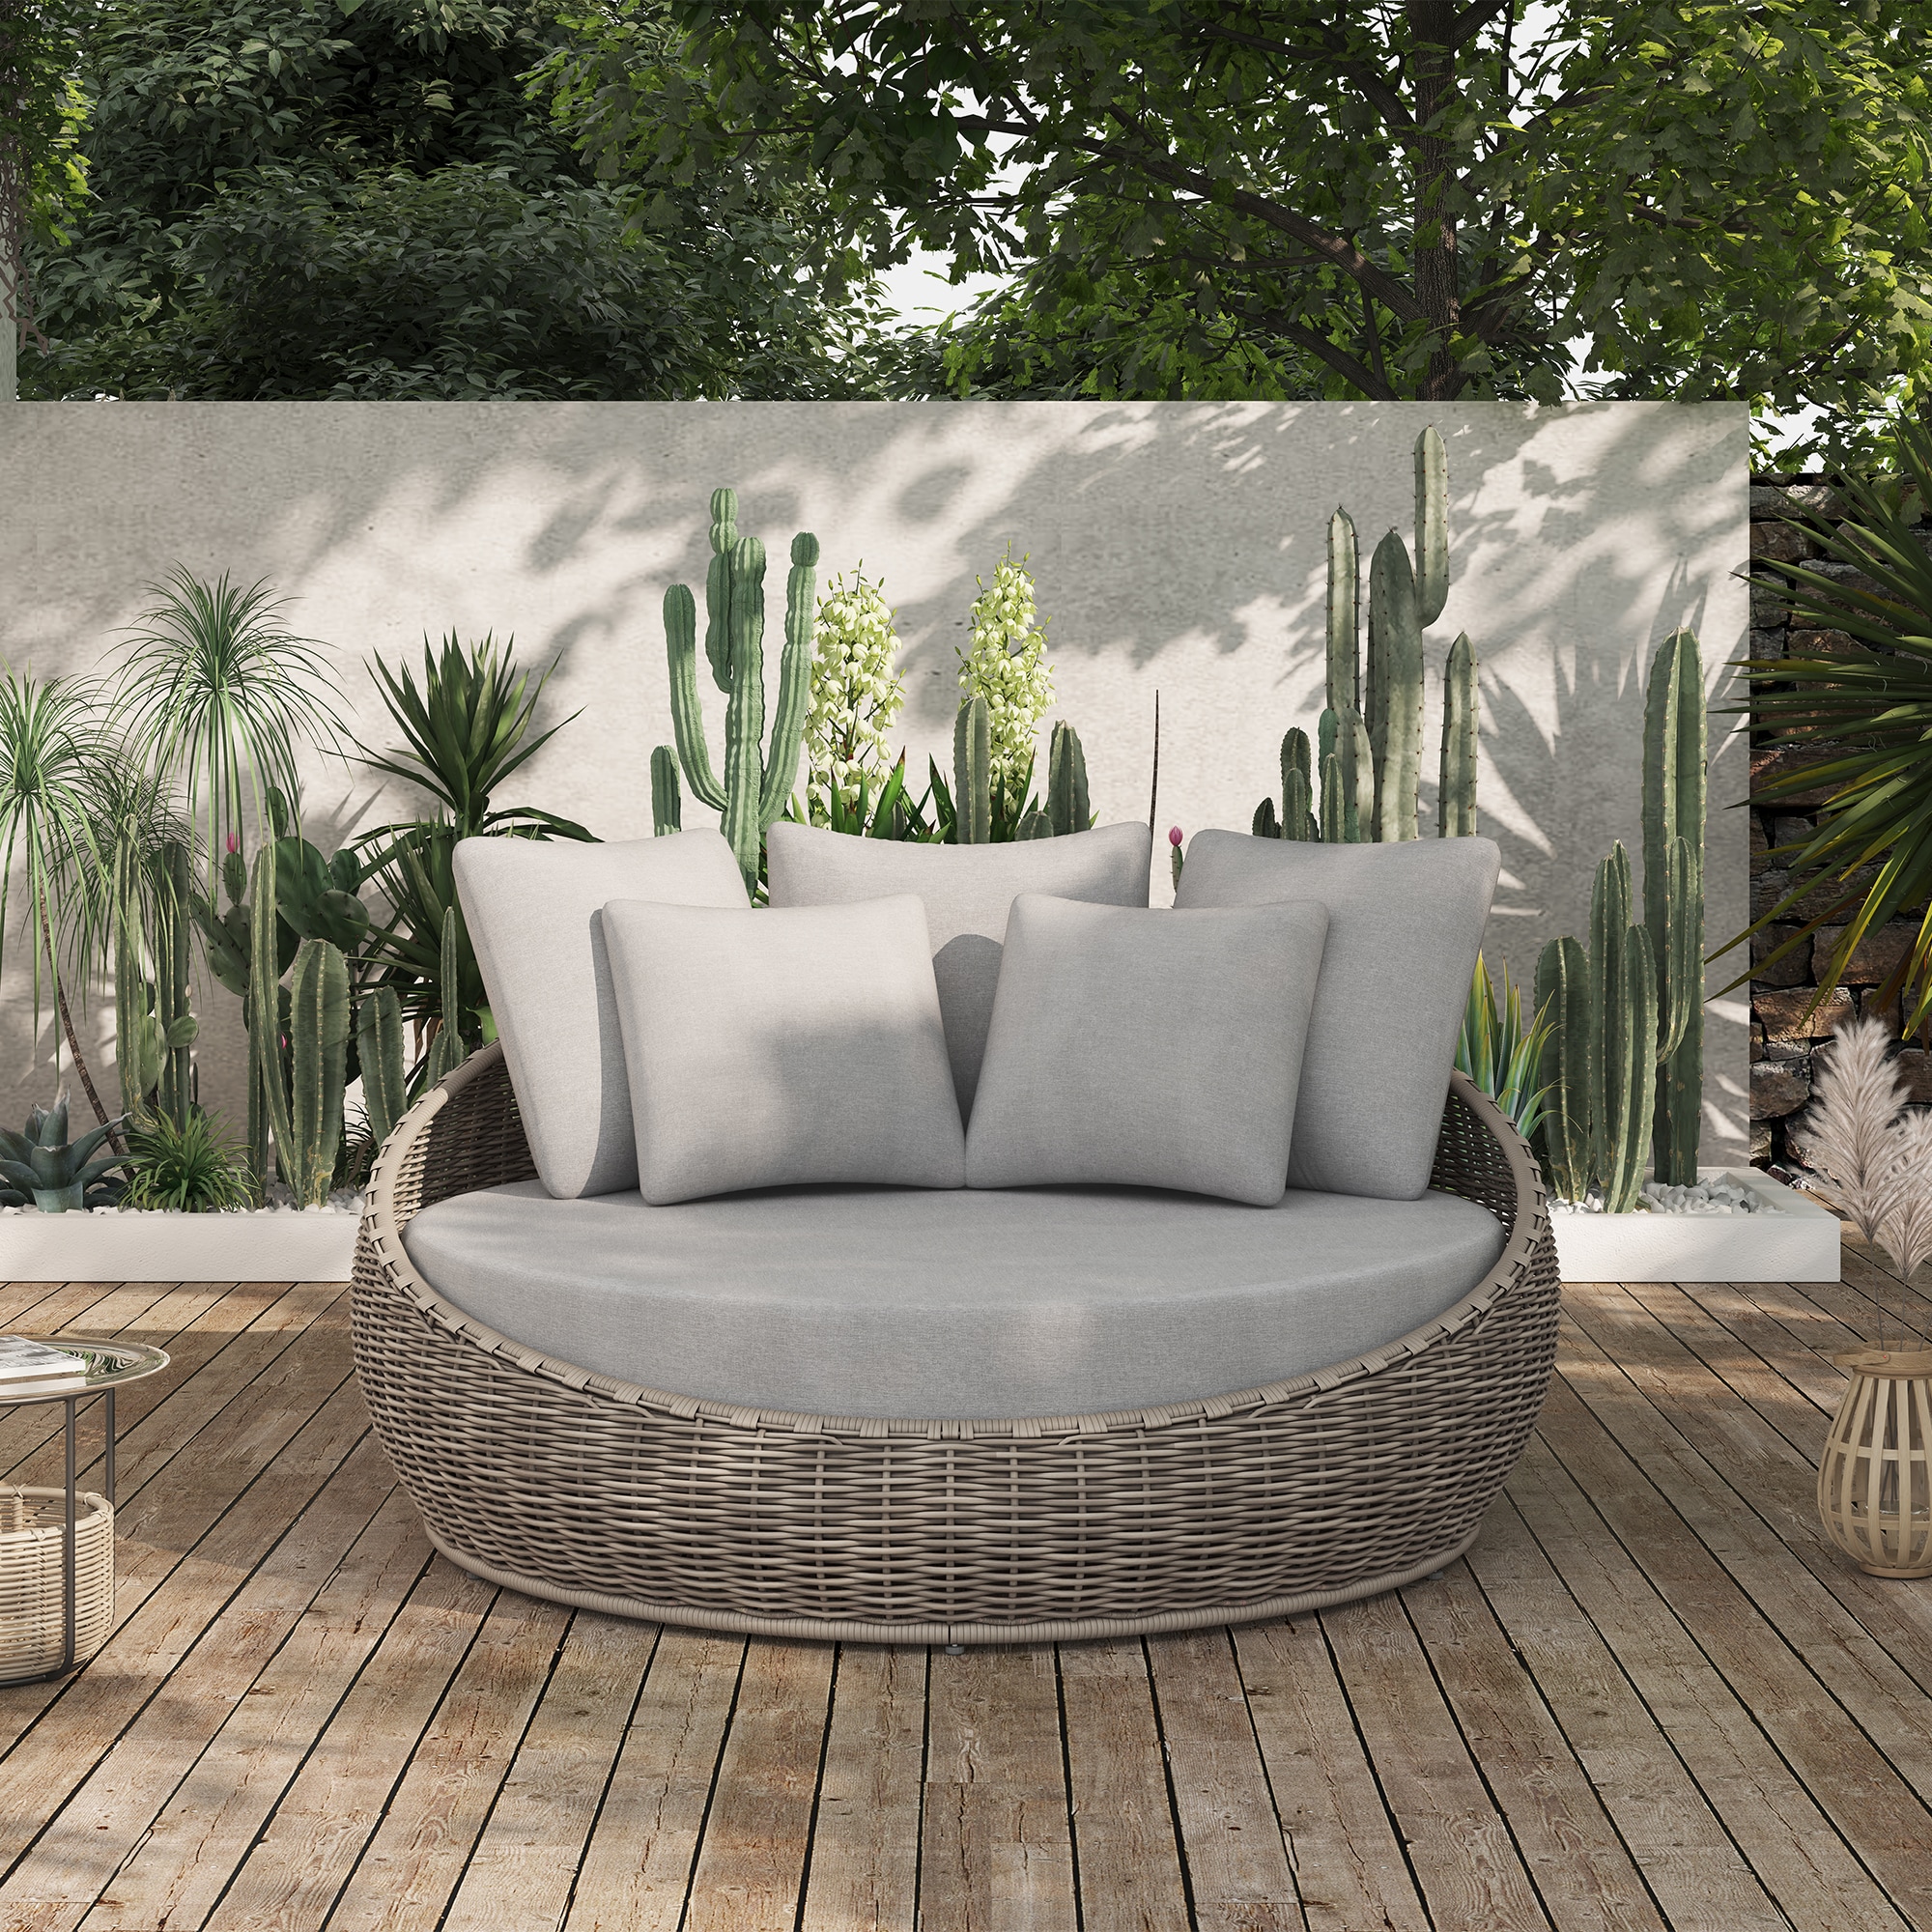 Angeles Home Cushioned Wicker Rattan Outdoor Daybed Thick Pillows Lounge Chair with White Cushion